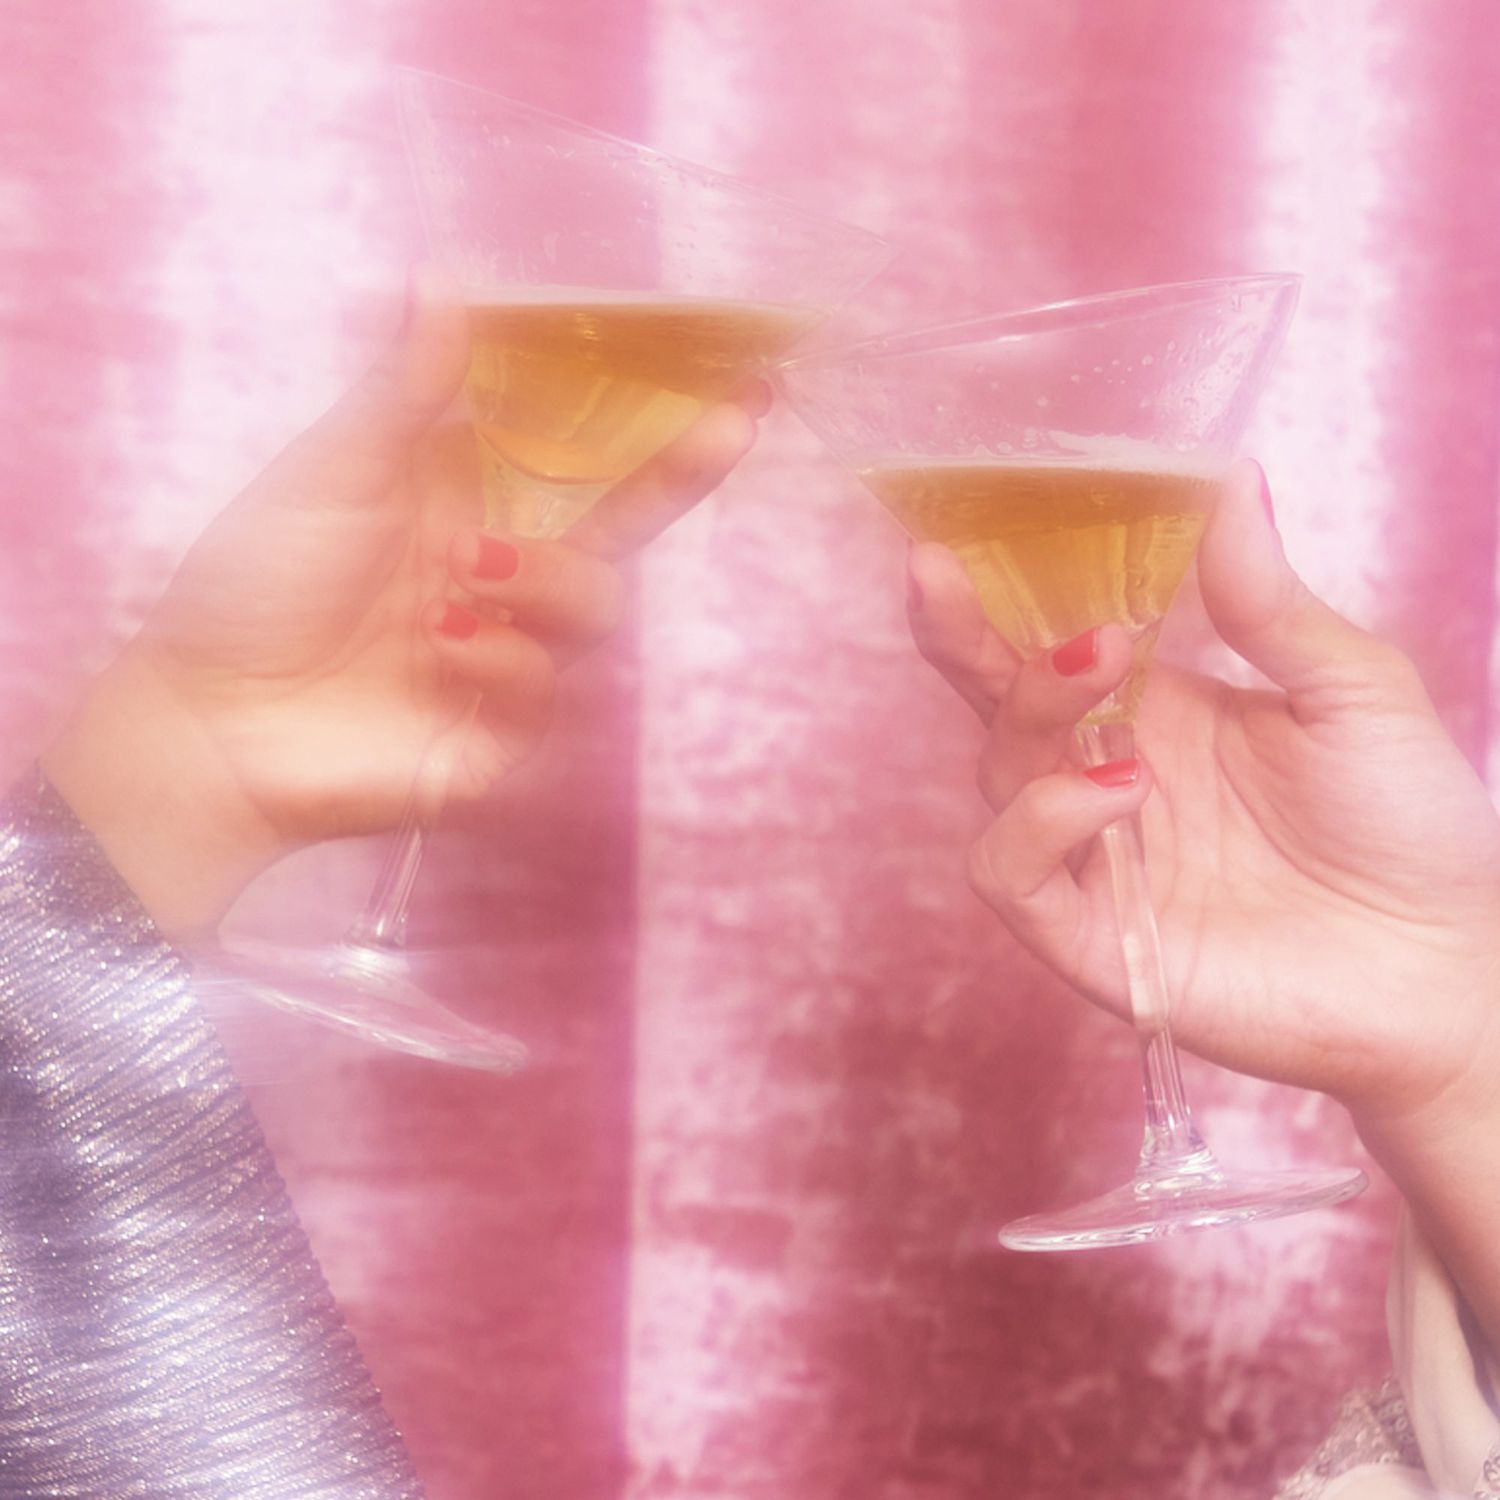 glowy and hazy image of two hands toasting champagne against a pink background